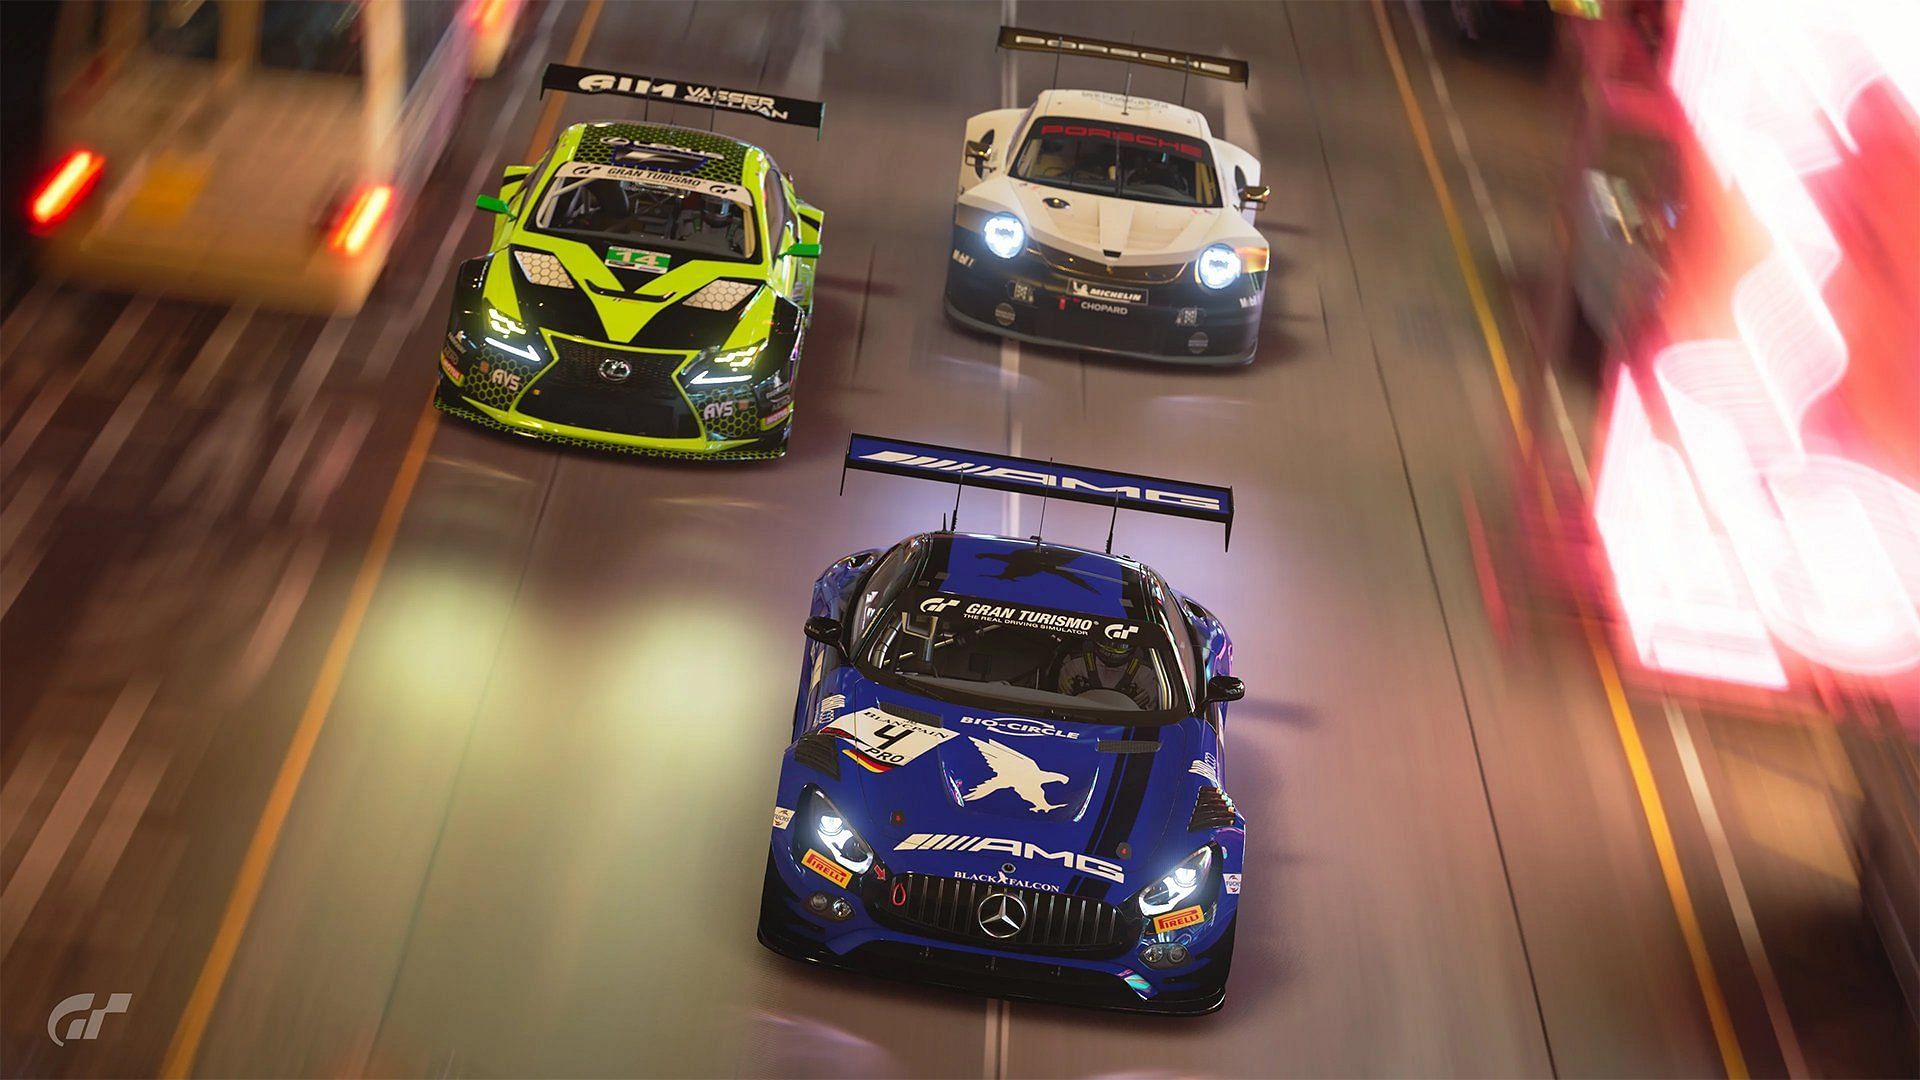 Gran Turismo 7: here are 23 of the game's coolest cars